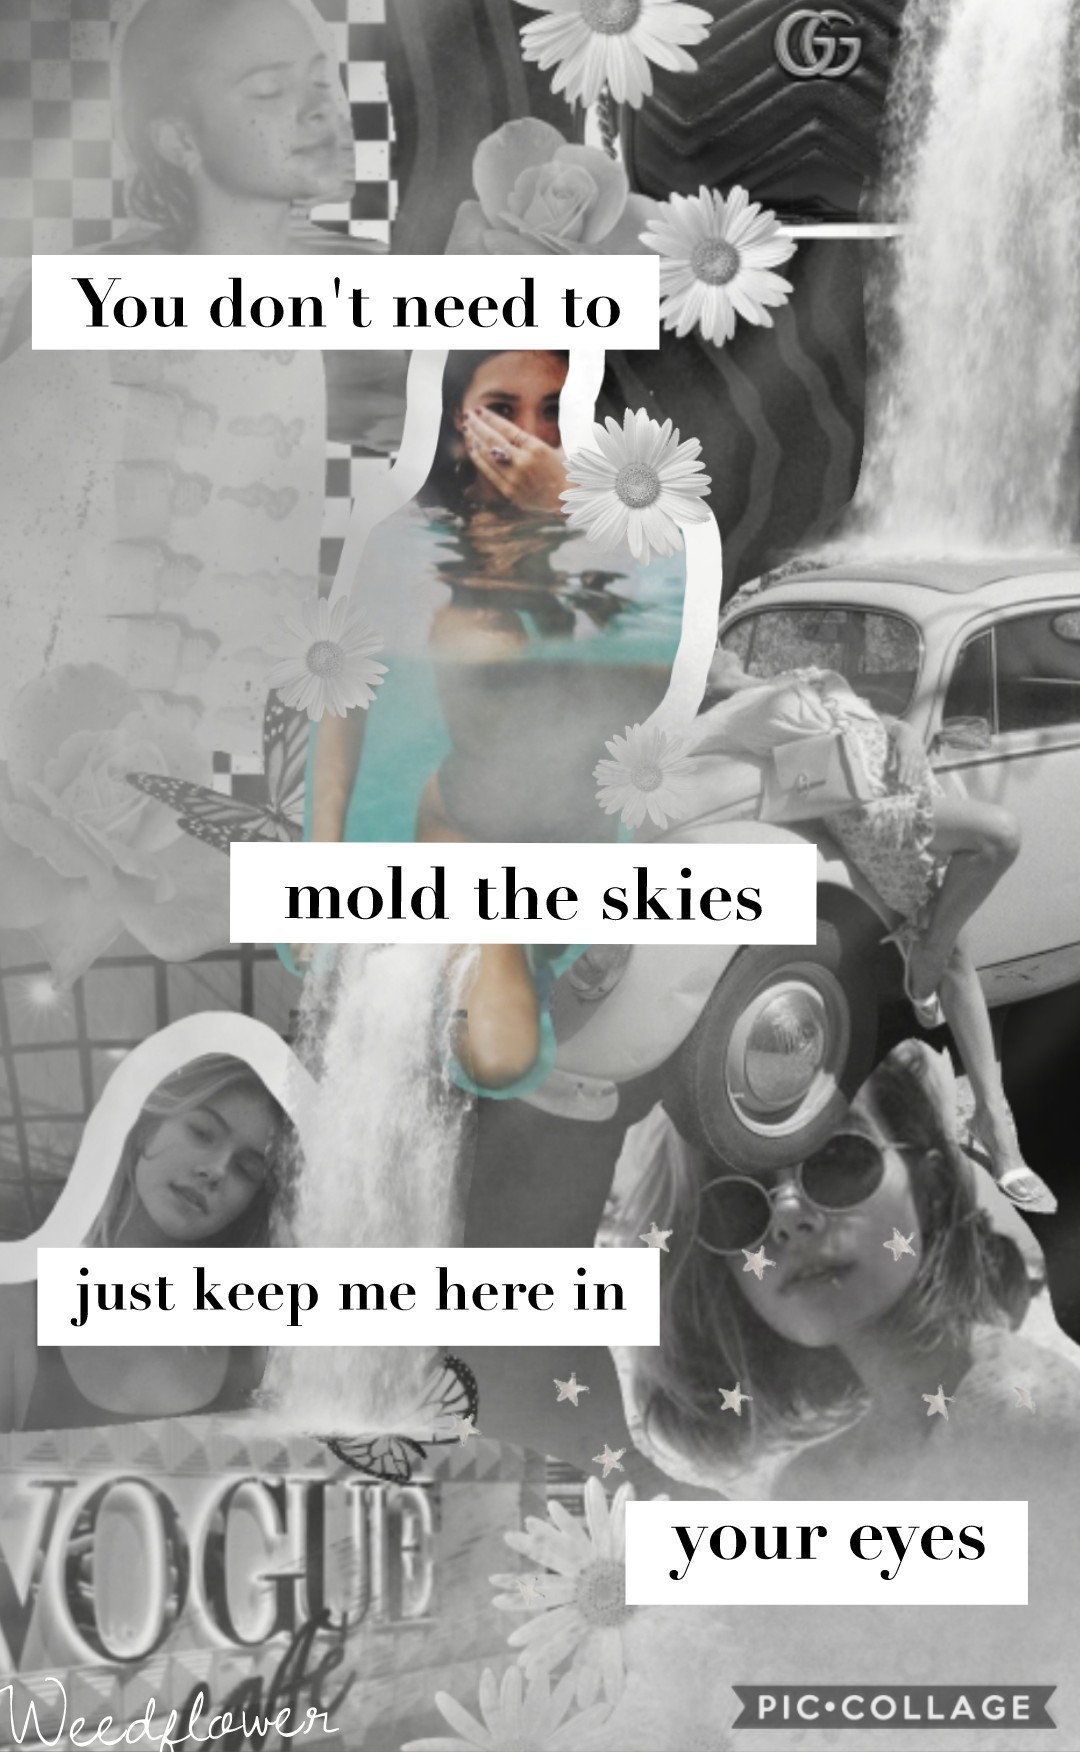 here is a black and white collage!
i dont know if the blue girl in the middle ruined it ir not. . . but i wanted to add some pop. oooh i just realized that rhymes! LOL 